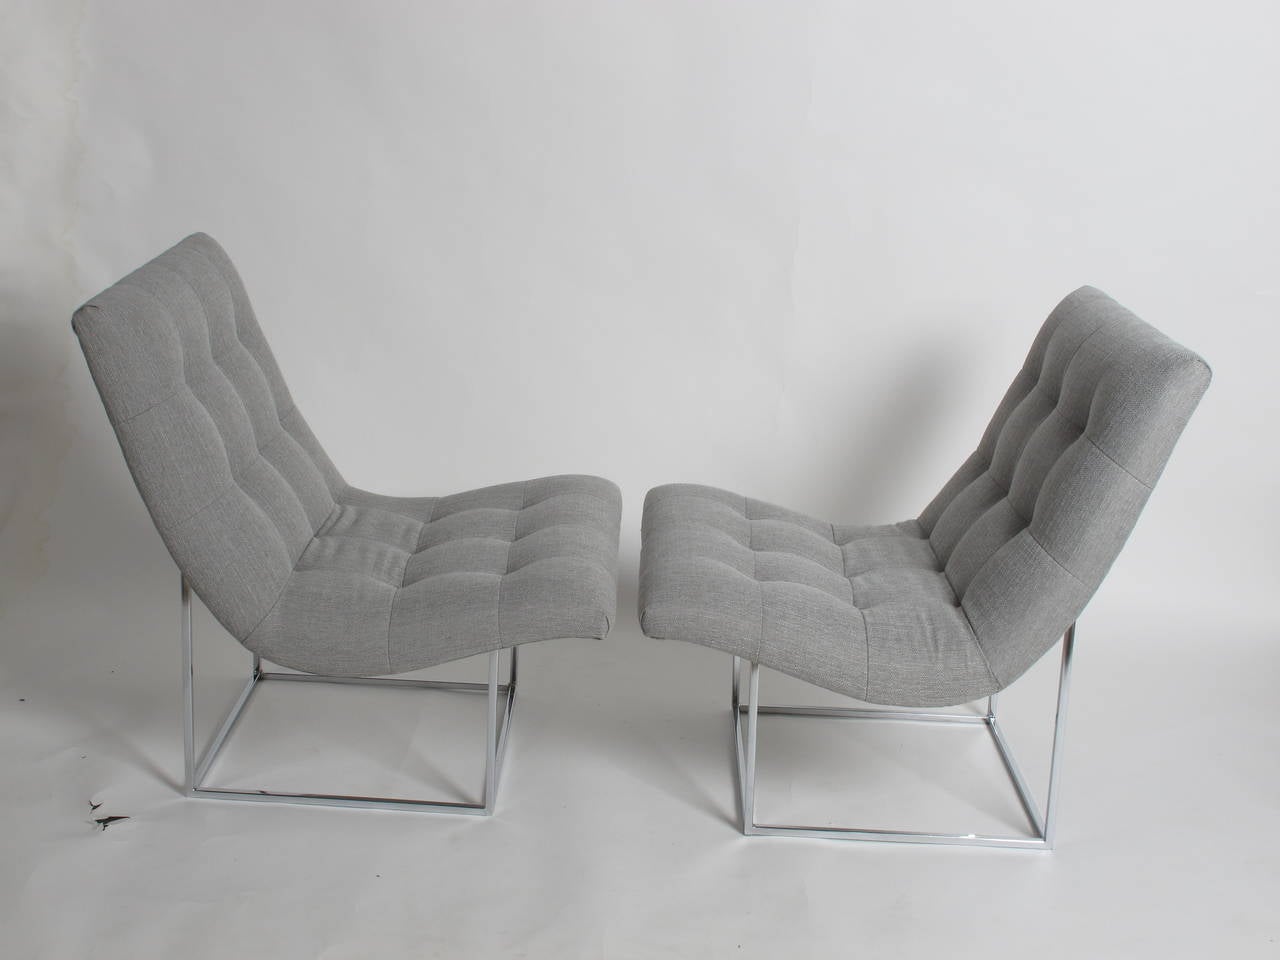 Late 20th Century Pair of Milo Baughman Scoop Lounge Chairs